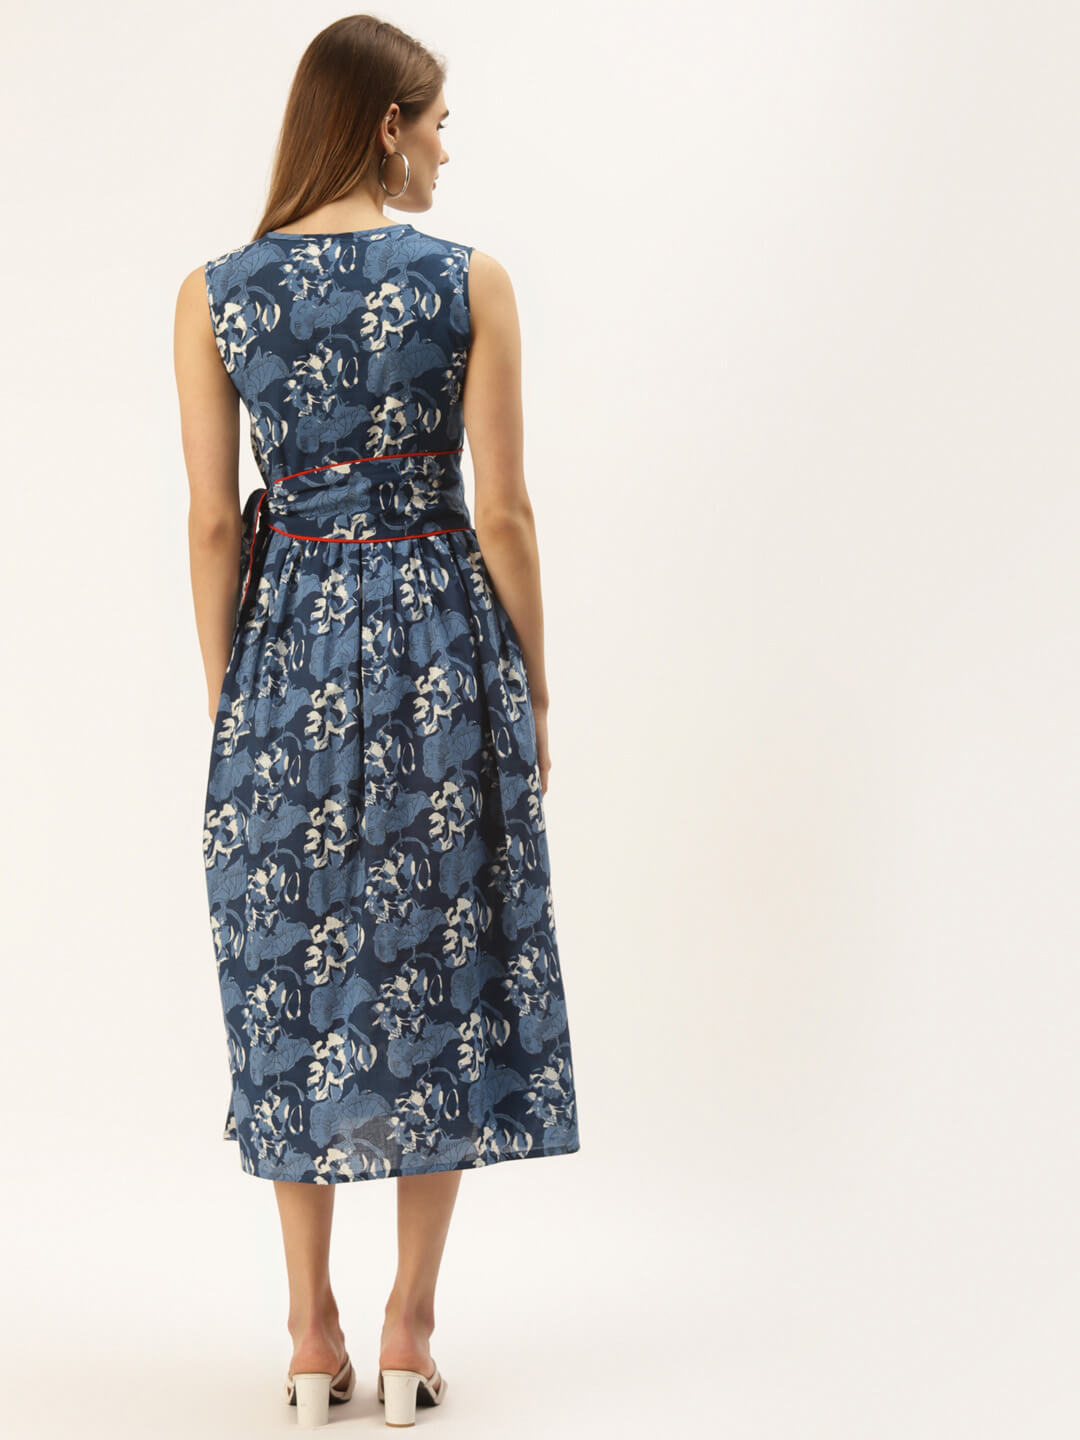 Blue & White Floral Printed Sleeveless Dress With Tie-Up Closure